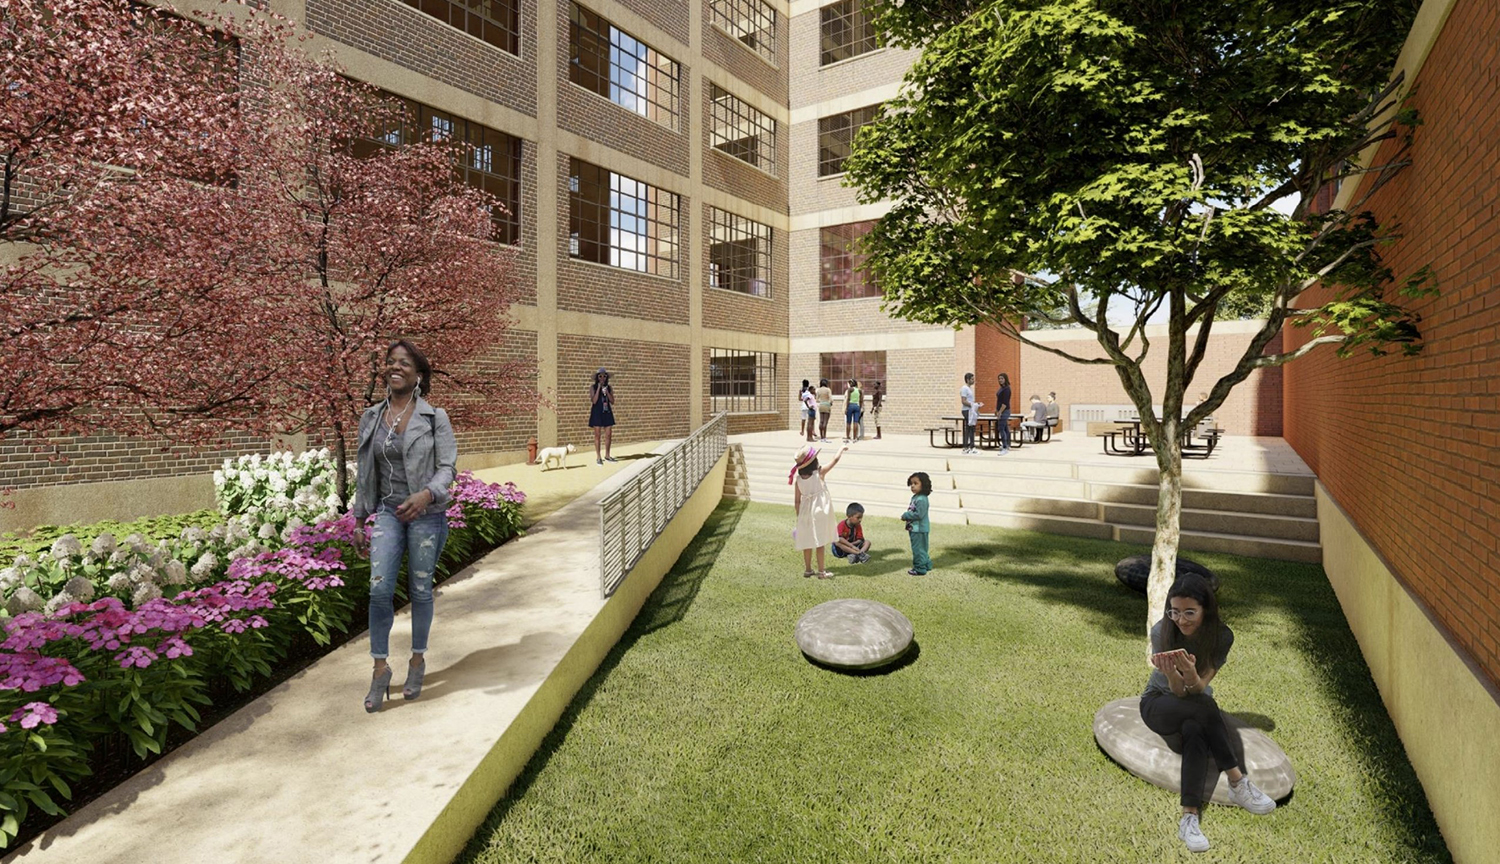 Courtyard at Parkview Lofts and Parkview Commerce. Rendering by FitzGerald Associates